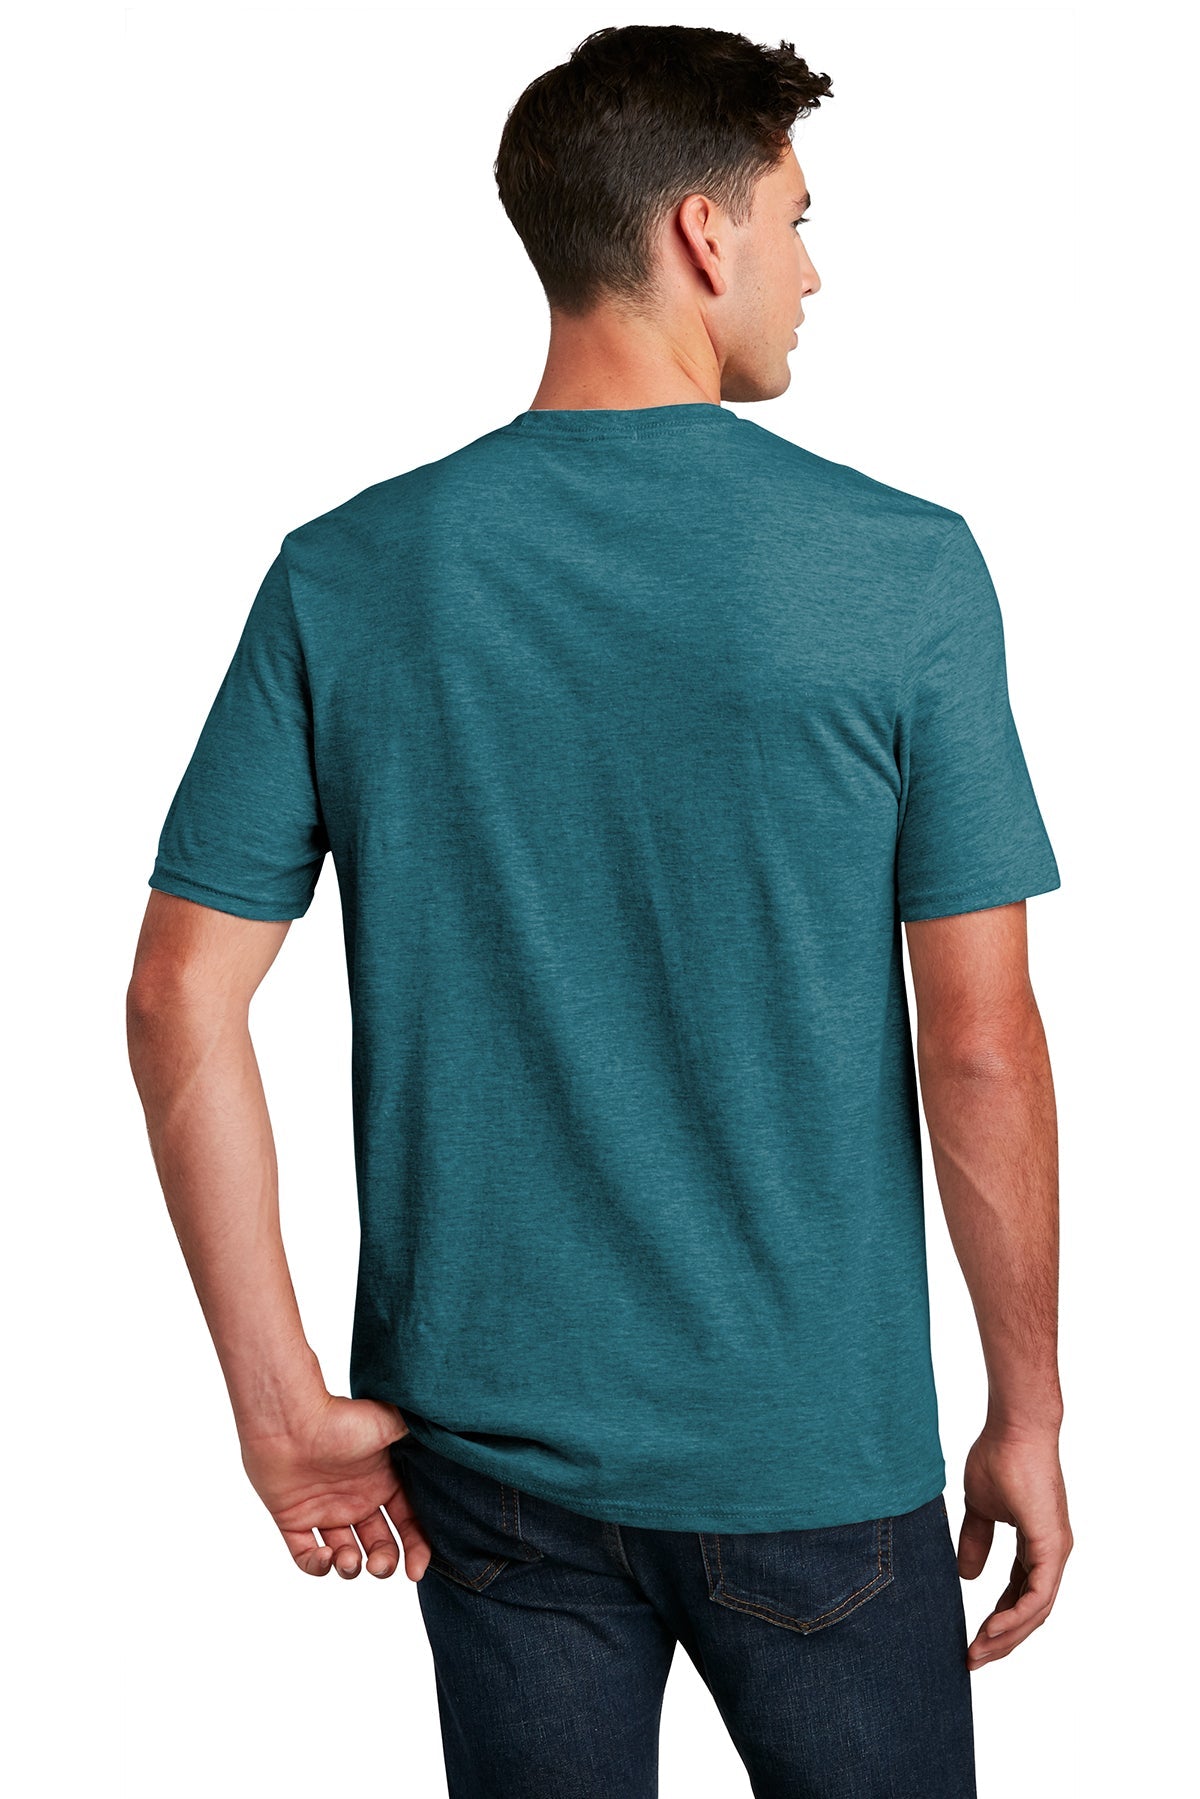 District Made Mens Perfect Blend Tee's, Heathered Teal